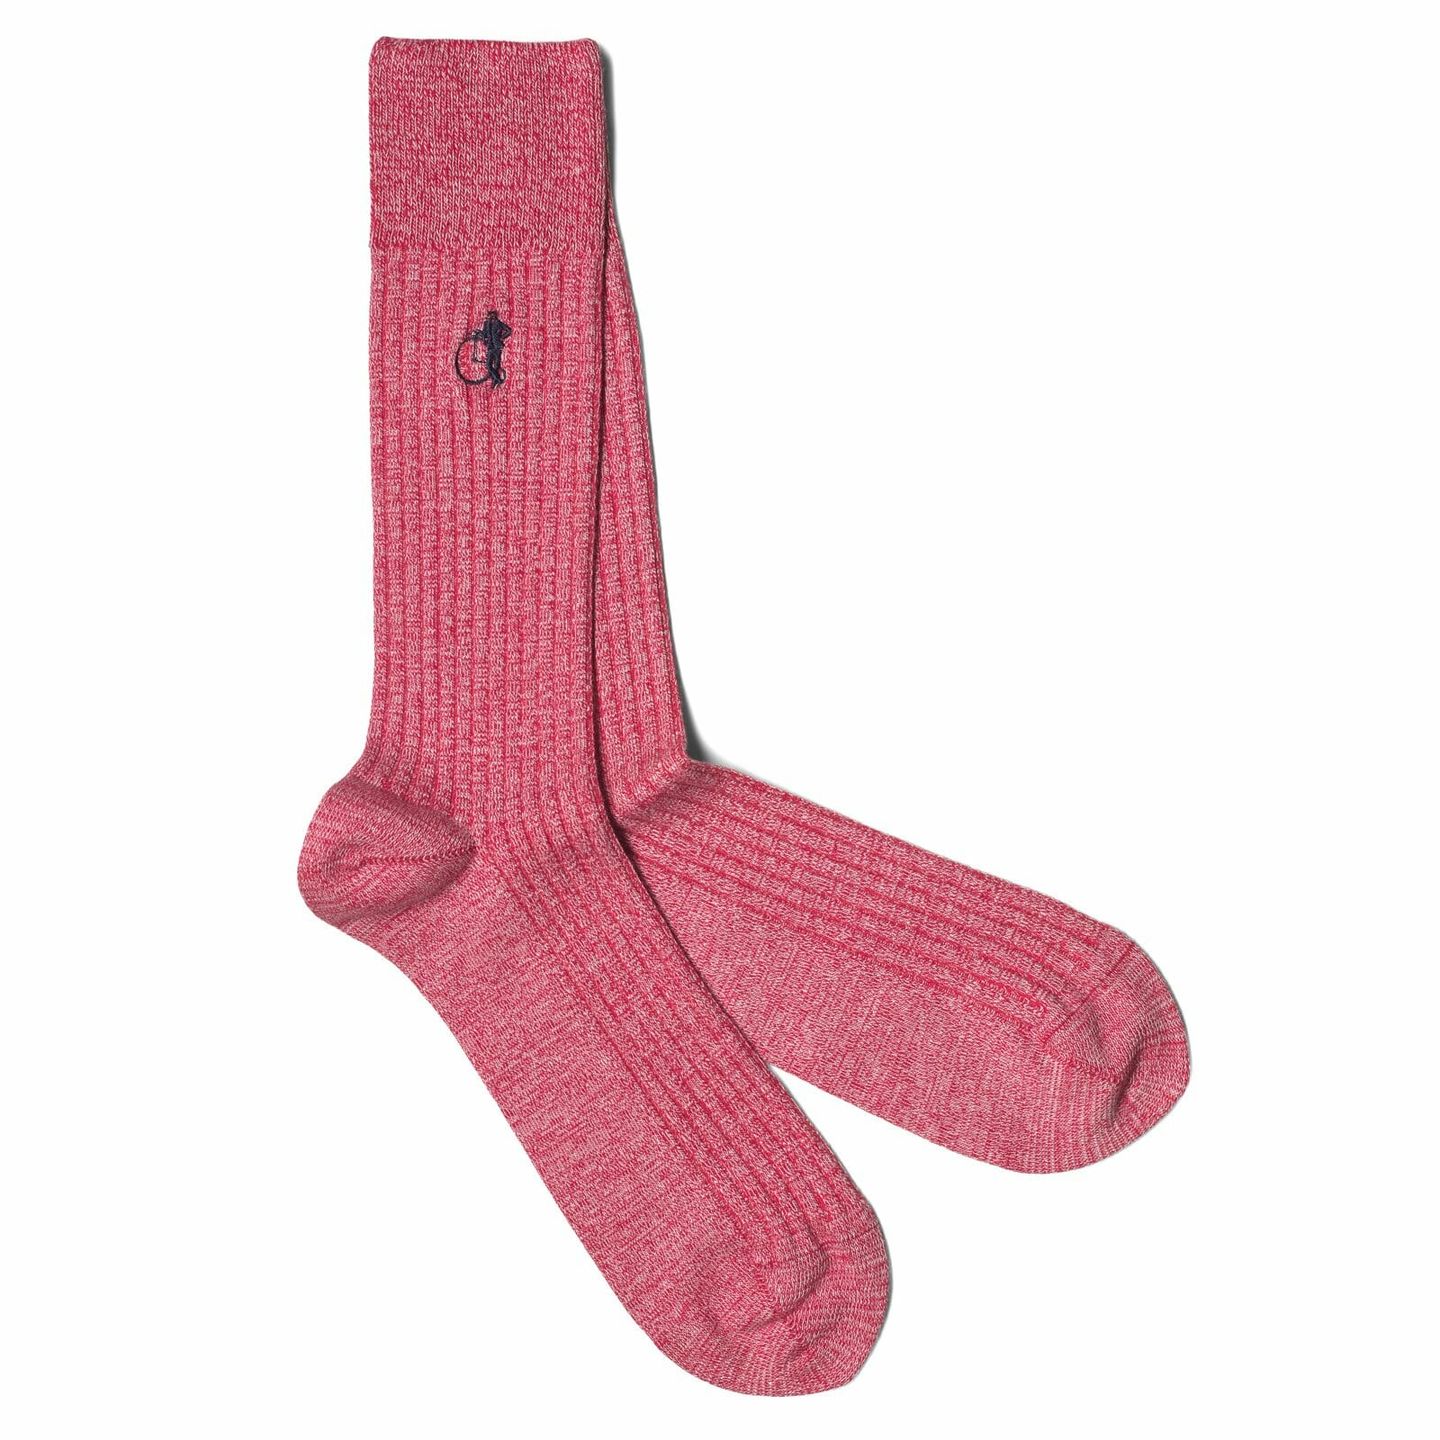 Red marl socks on a white background